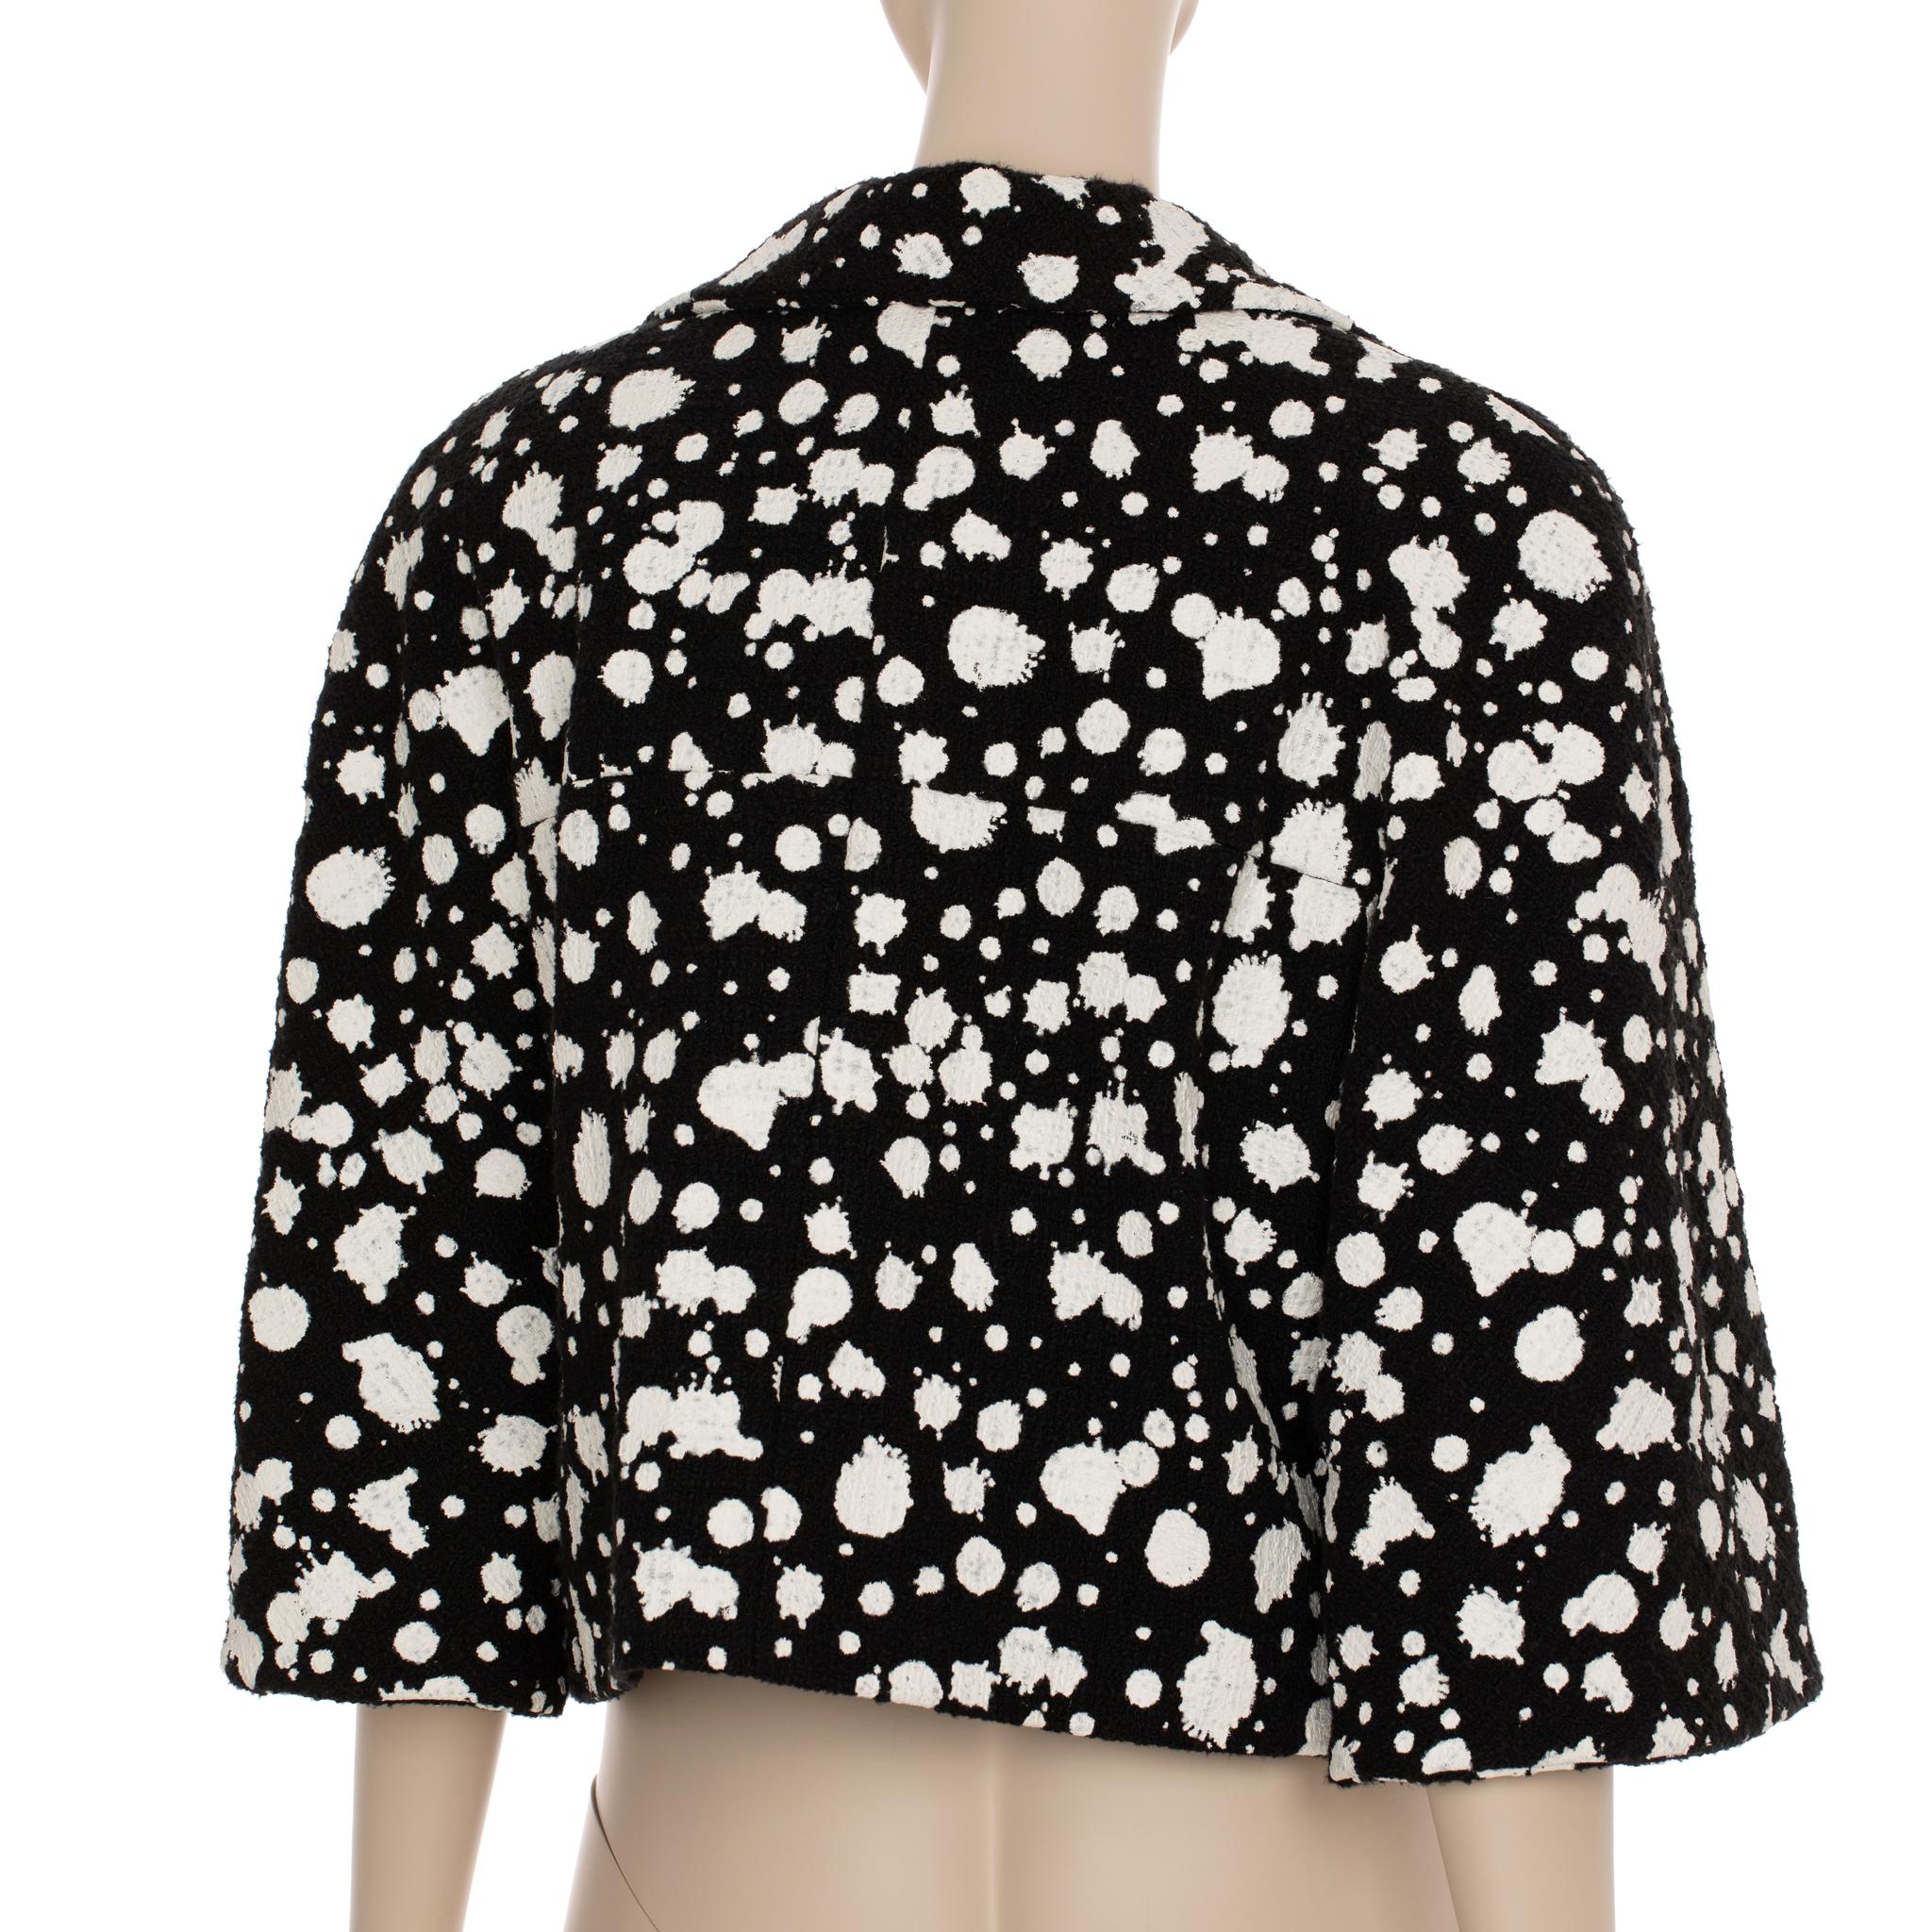 This Chanel crop jacket has a unique paint splatter effect, creating an eye-catching look. Crafted with a blend of wool and cotton, providing comfort while making a stylish statement.

Brand:

Chanel

Product:

Cropped Jacket

Size:

38